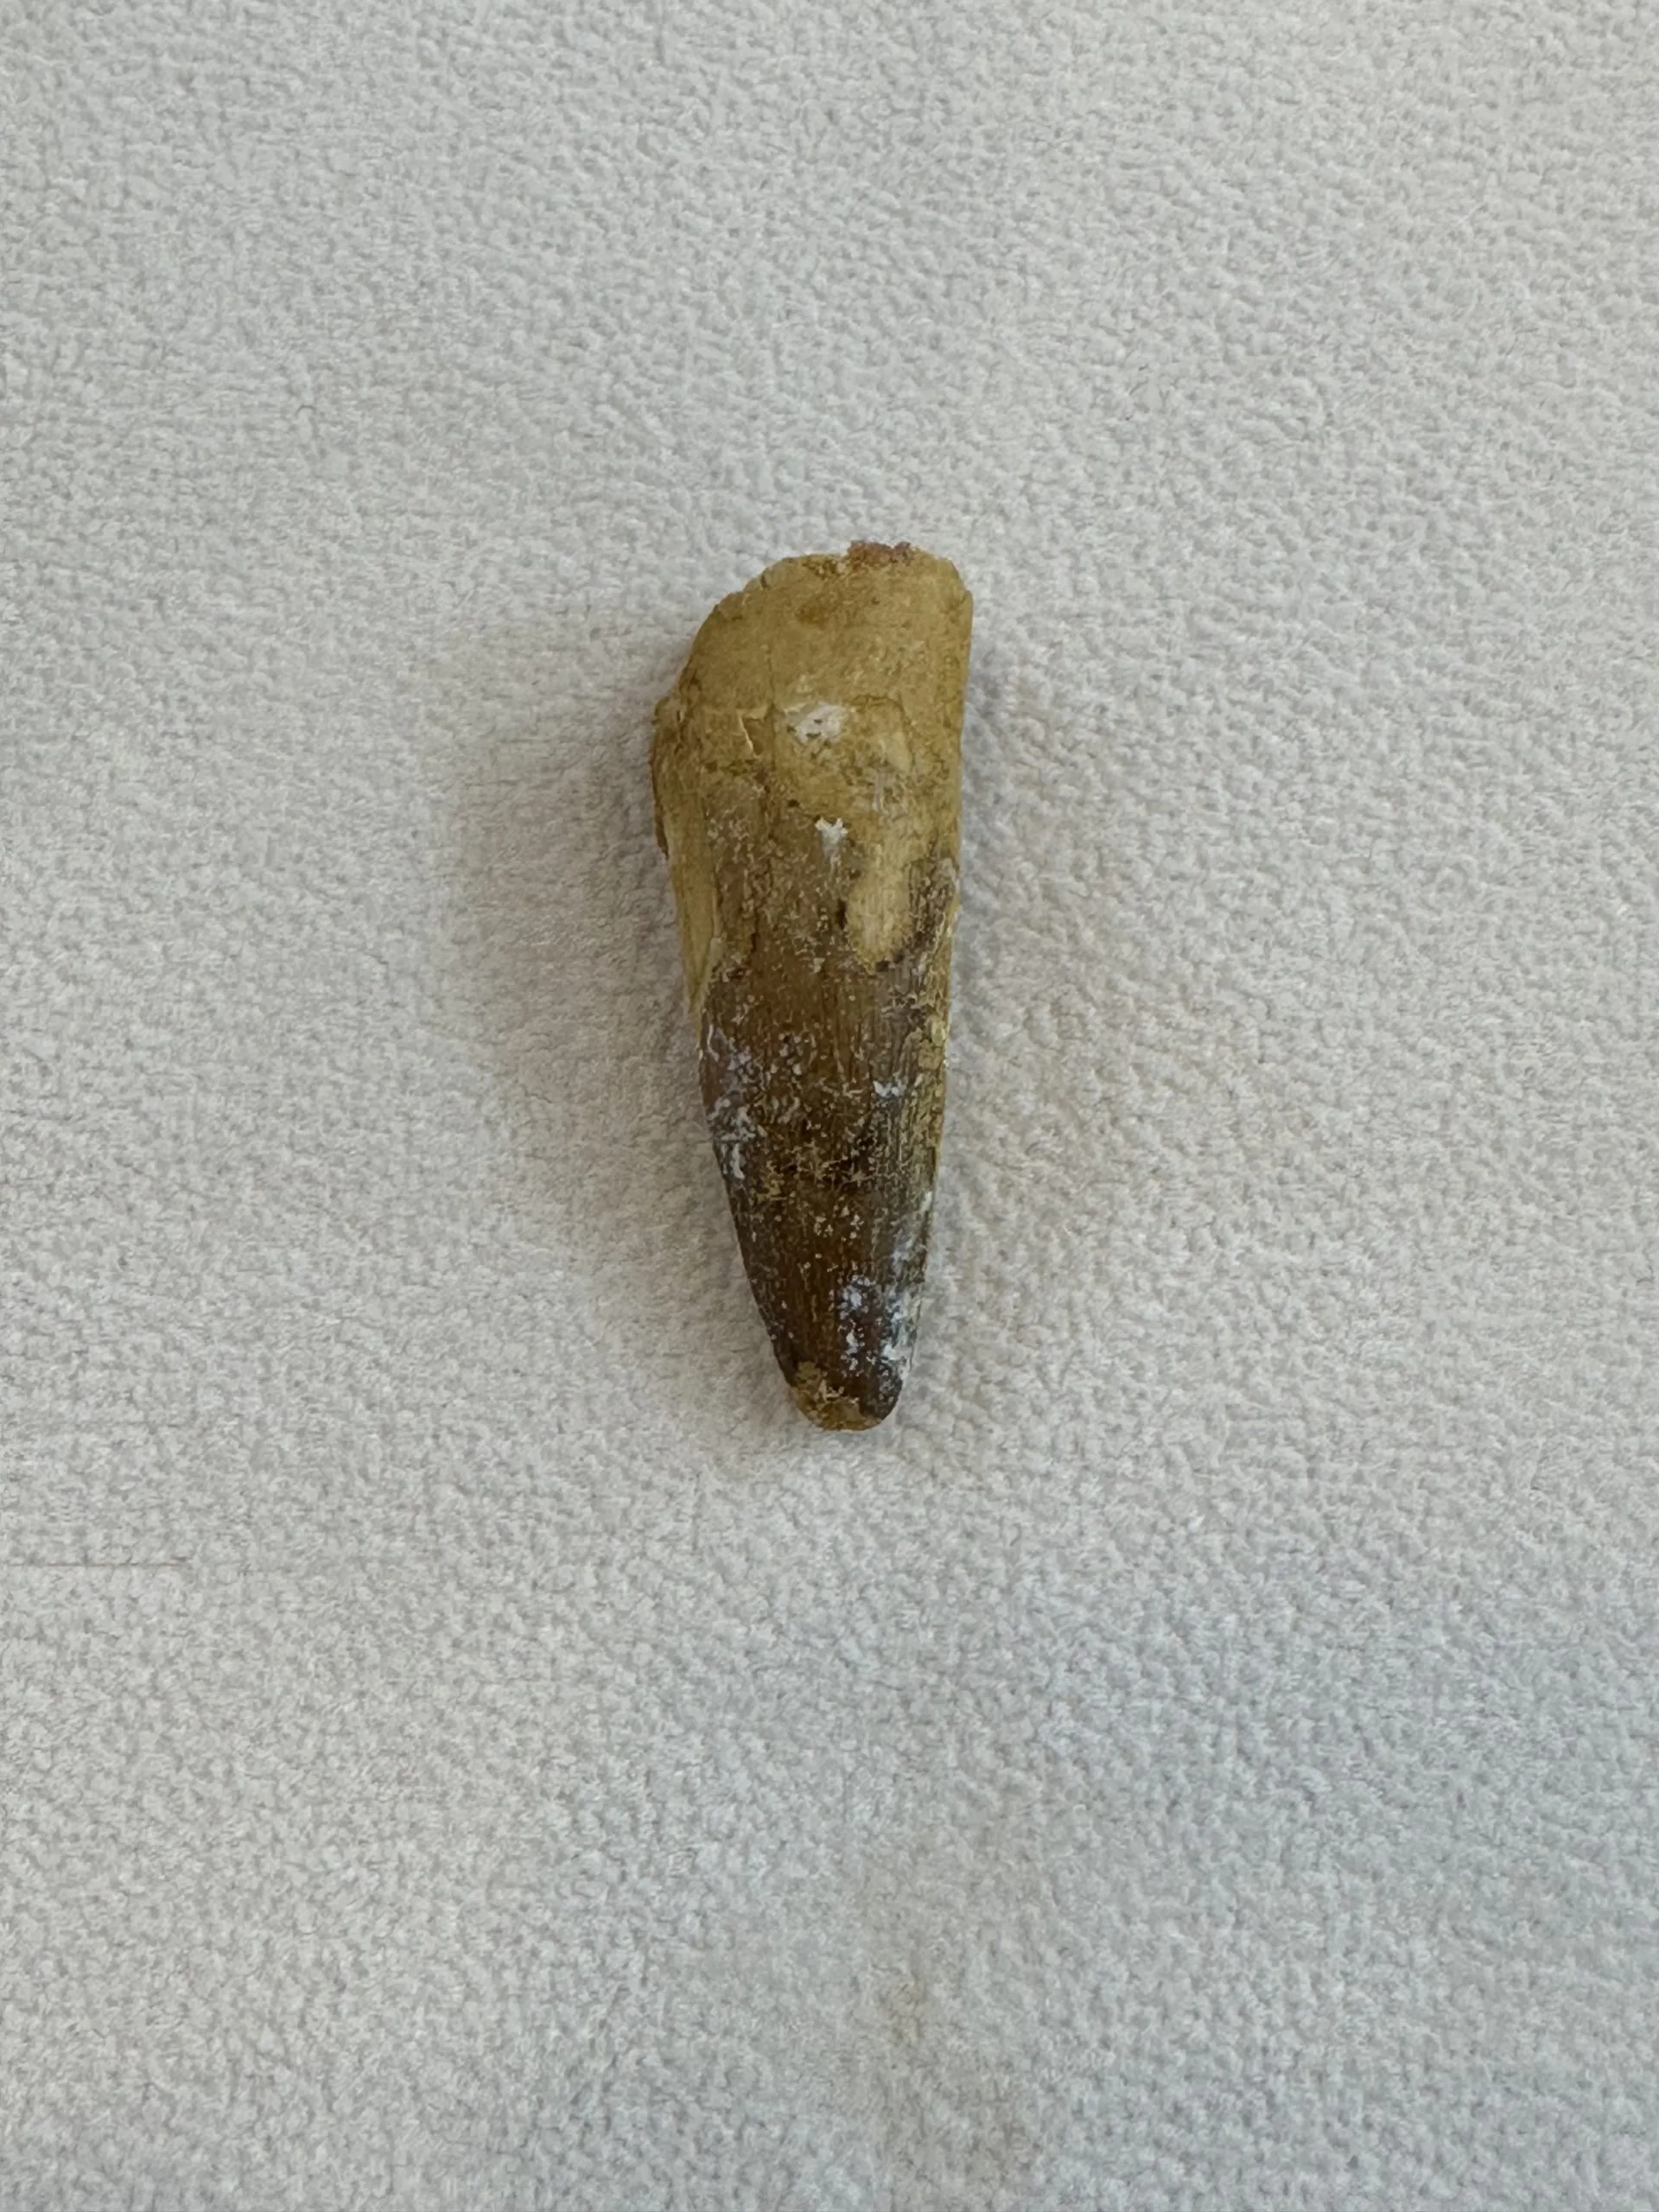 Spinosaurus Tooth, Morocco, 1 1/2 inch fossil Prehistoric Online